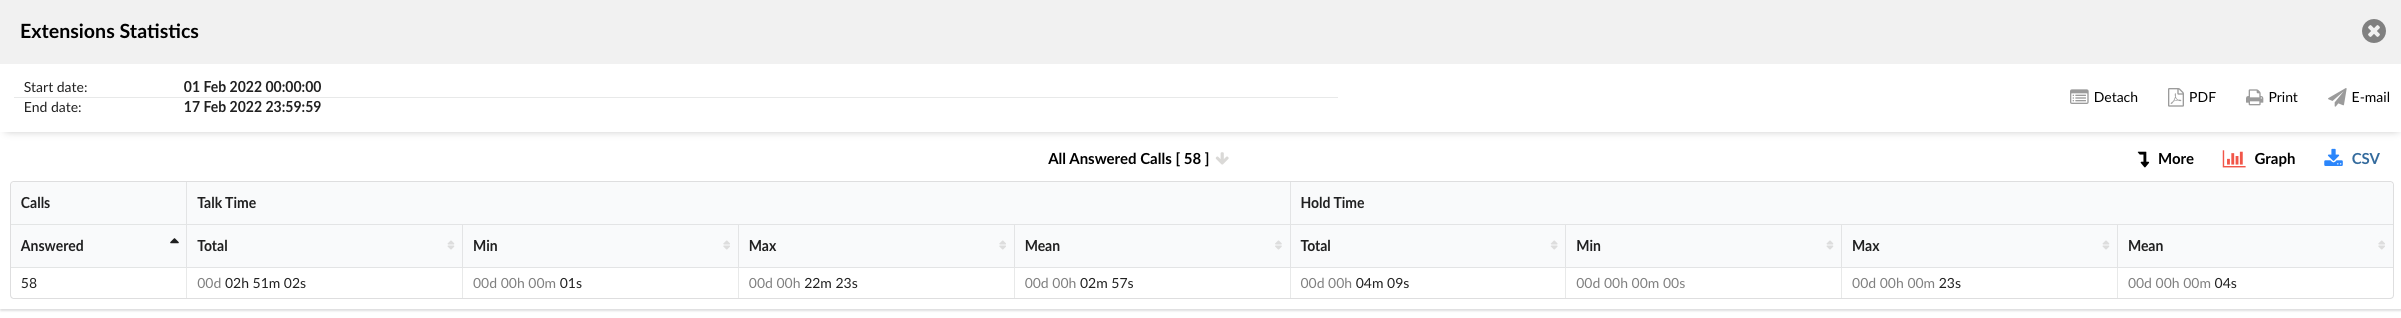 ext-statistics-all-answered-calls.png